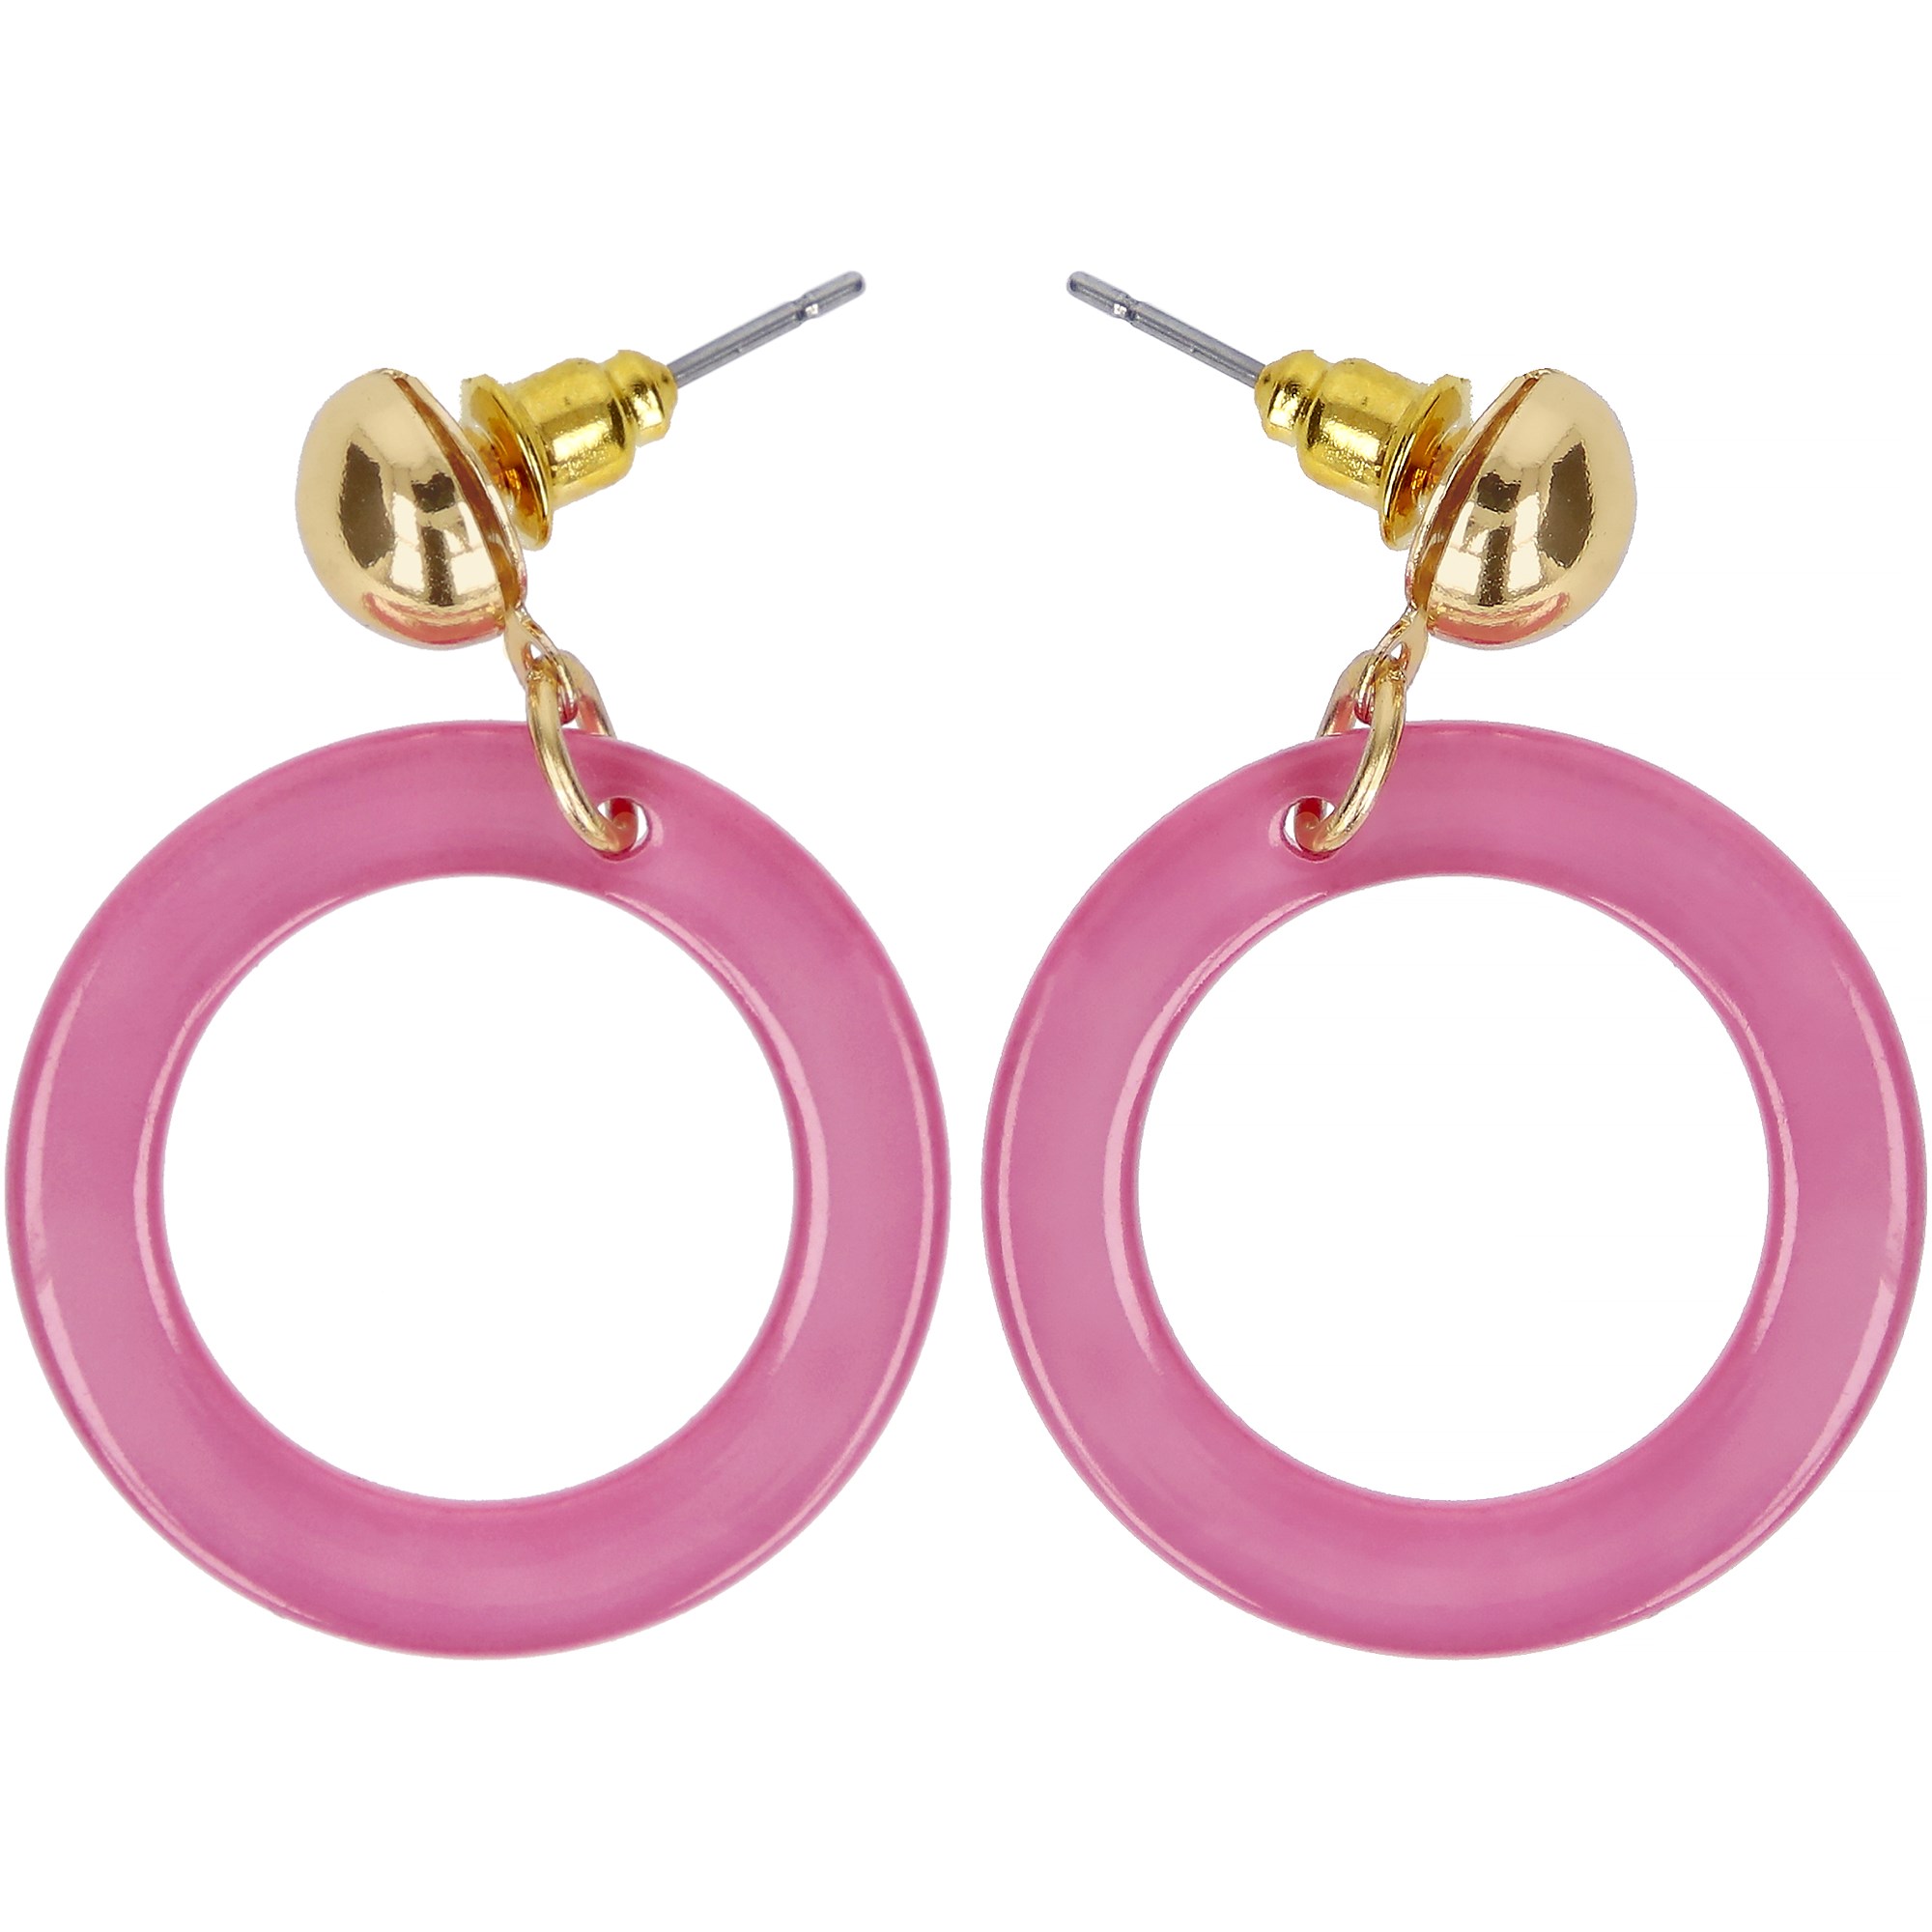 Läs mer om Dazzling Earrings gold stud with pink plastic